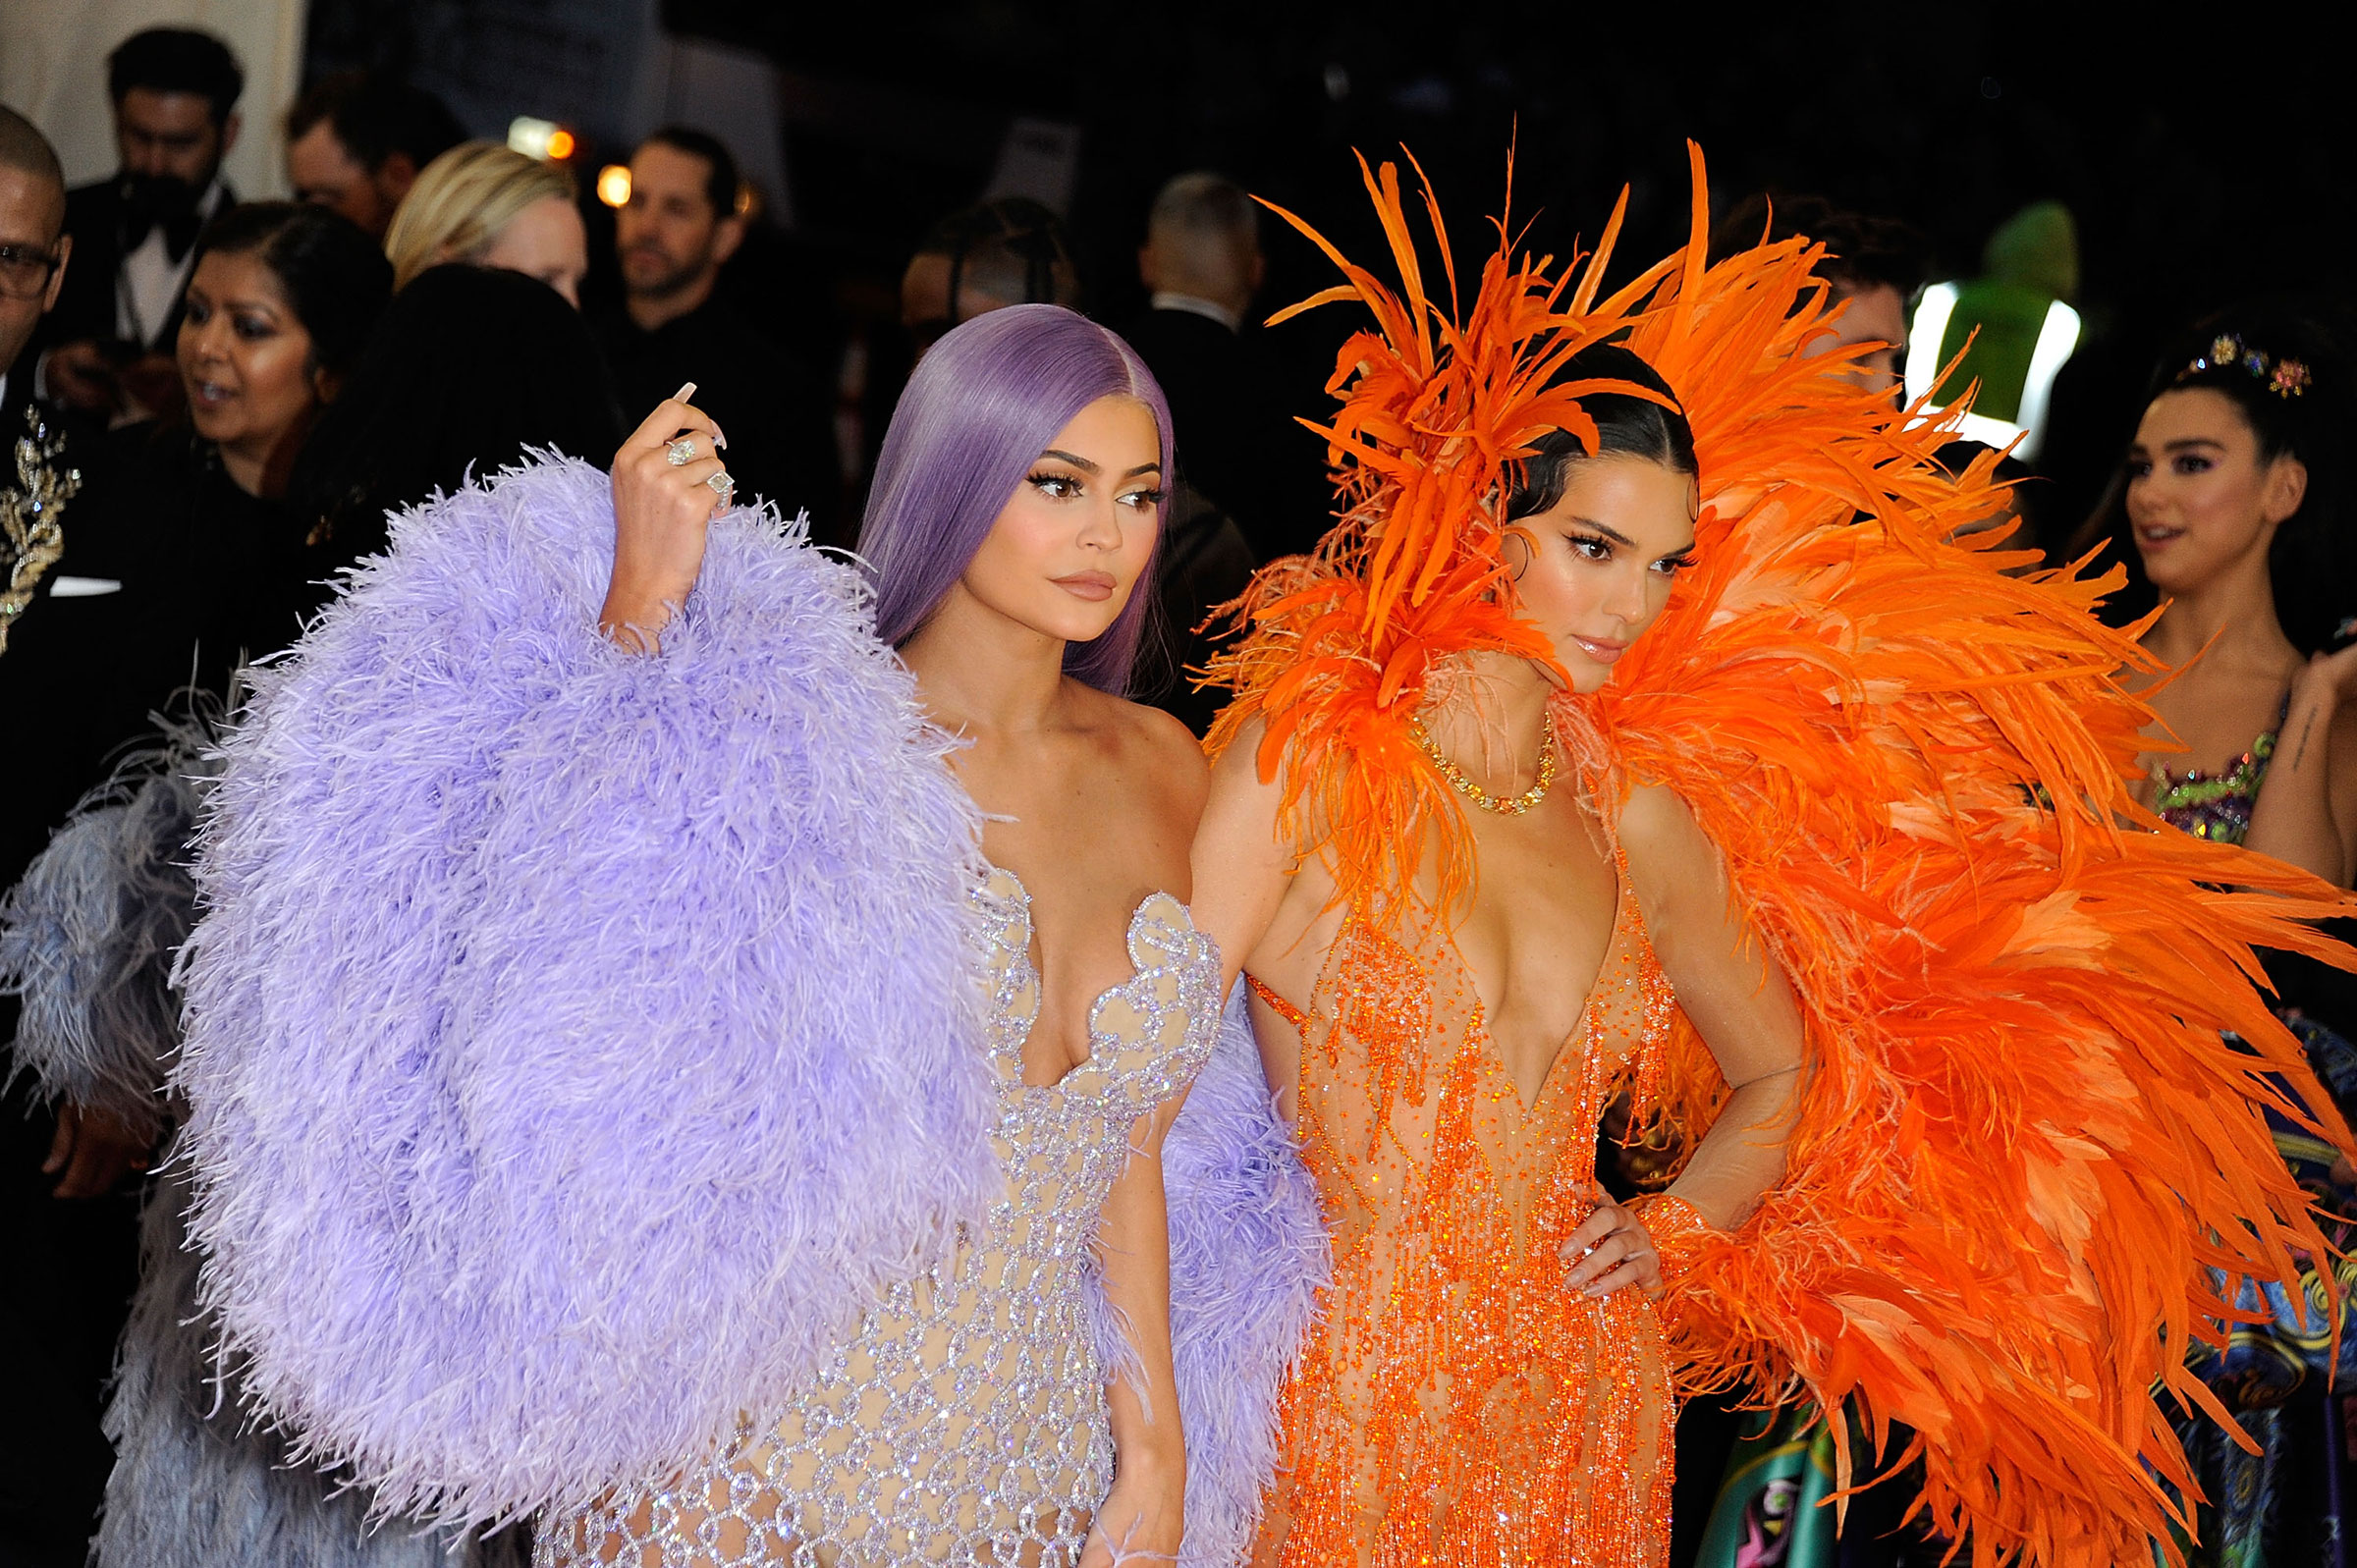 Kylie Jenner and Kendall Jenner at the 2019 Met Gala celebrating "Camp: Notes On Fashion."